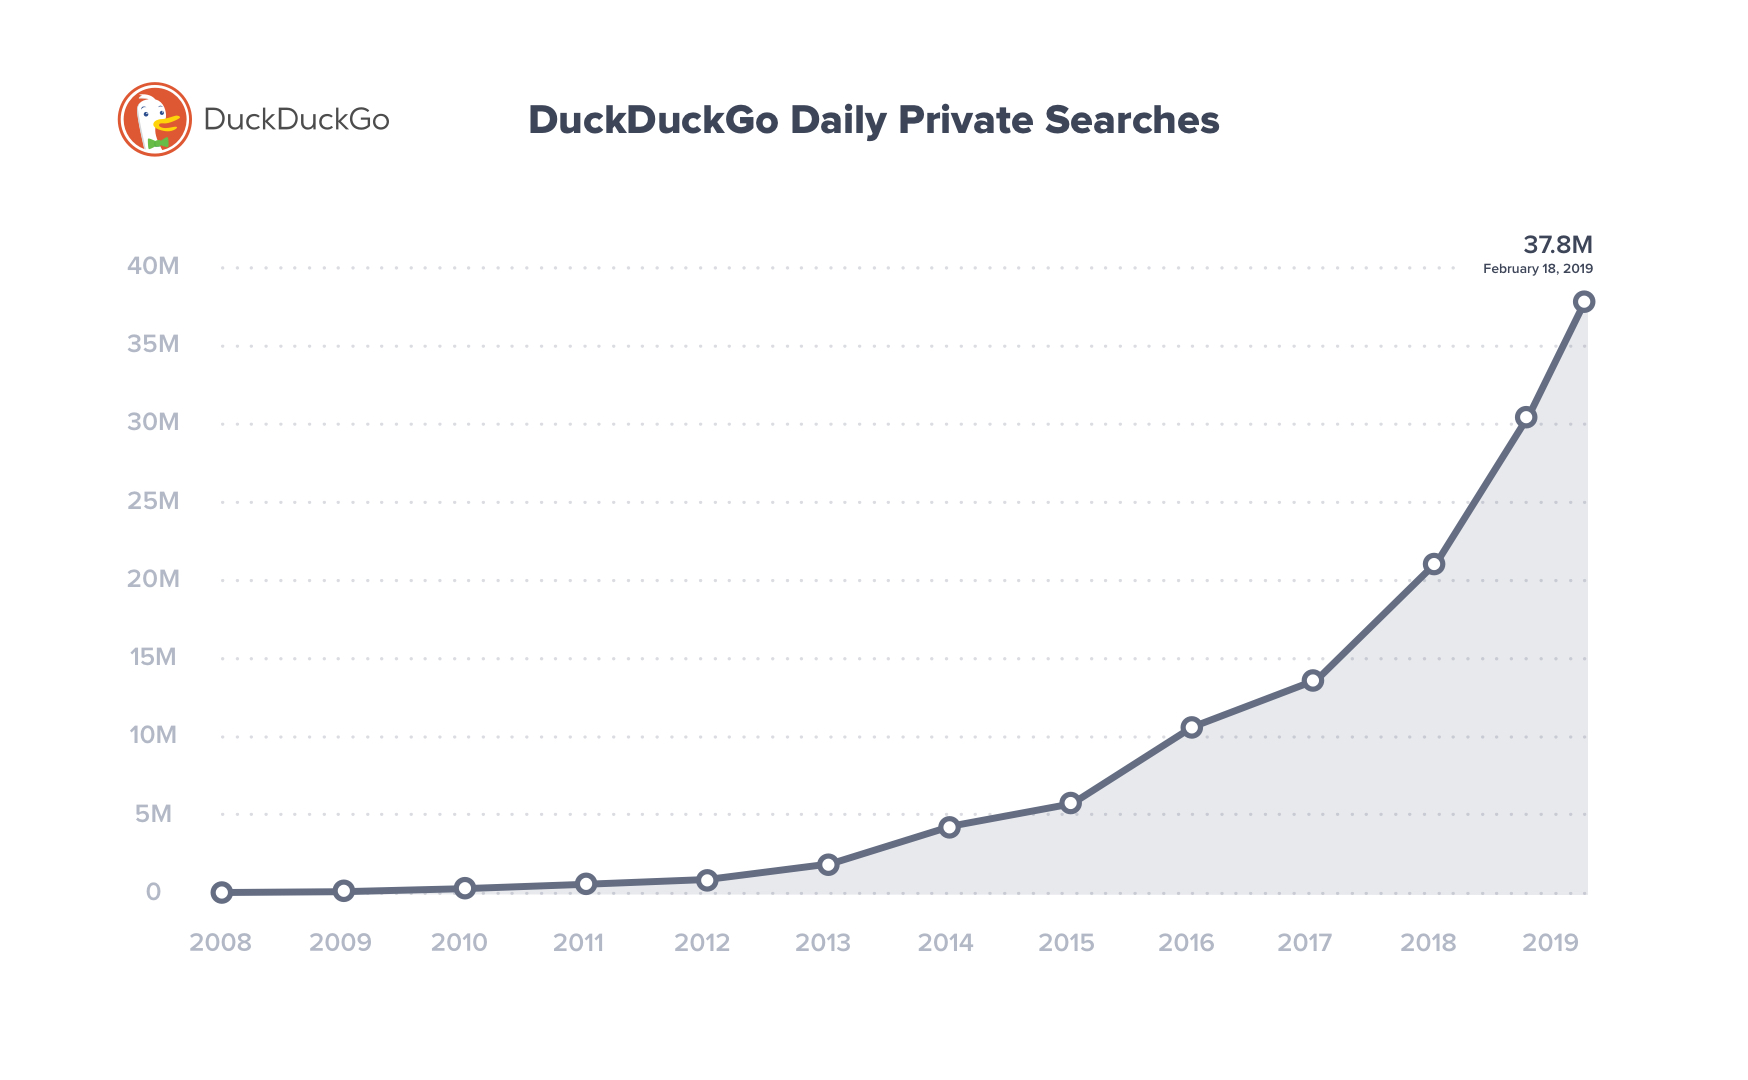 Chart showing the increase in DuckDuckGo traffic from 2008 to 2019.